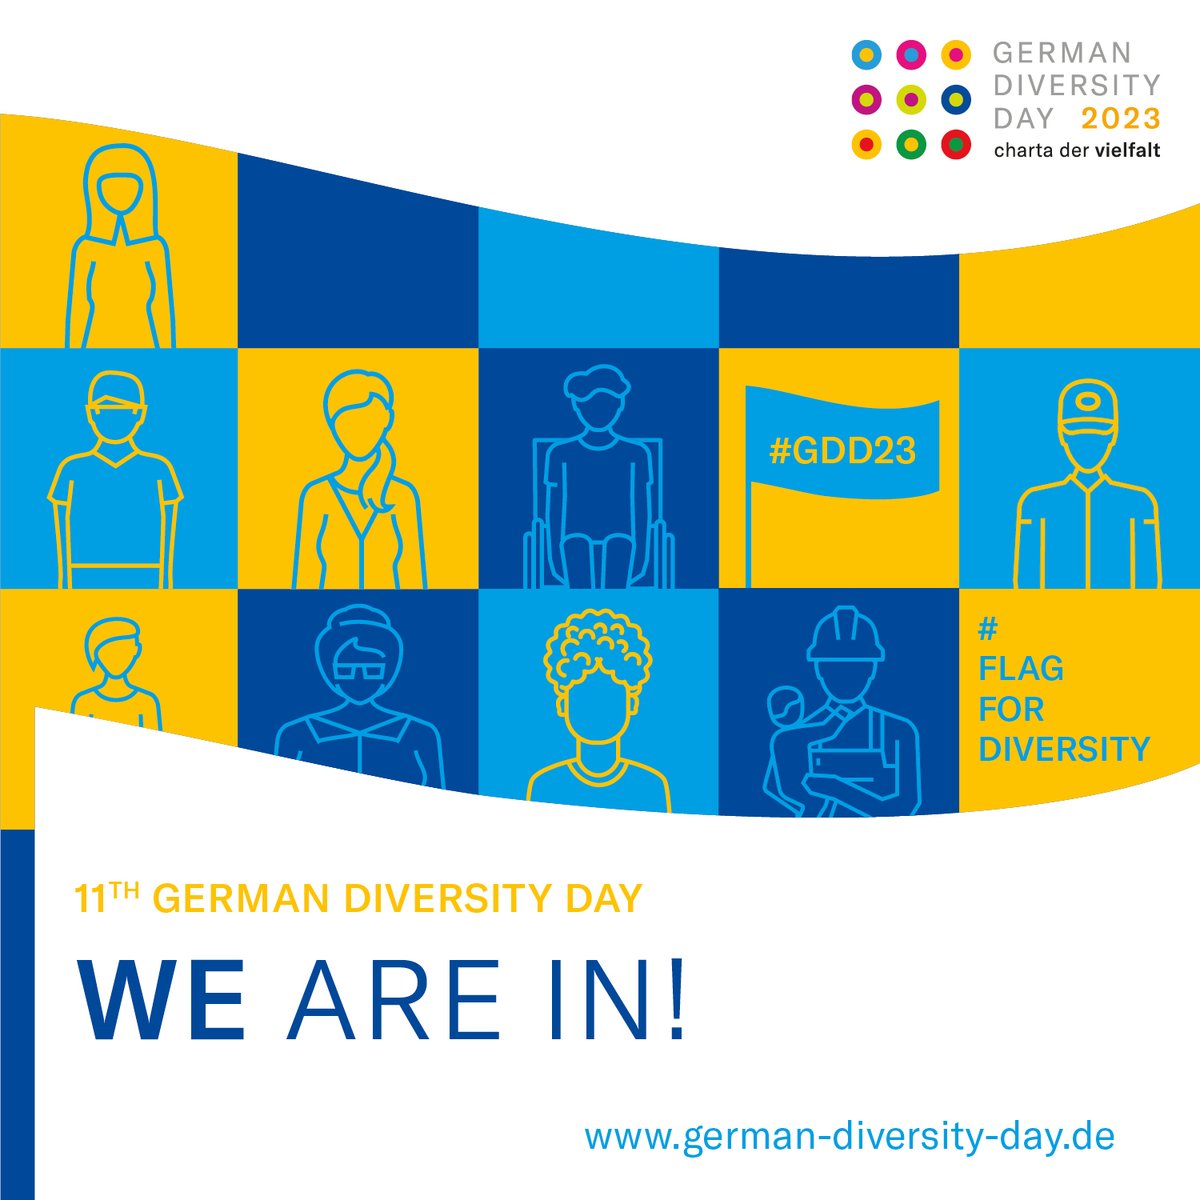 Today is German Diversity Day! As a member of the Diversity Charter, we are committed to variety and diversity in the workplace – for example with the help of our numerous employee resource groups. 

#DDT23 #FlaggeFürVielfalt #VielfaltVerbindet @ChartaVielfalt